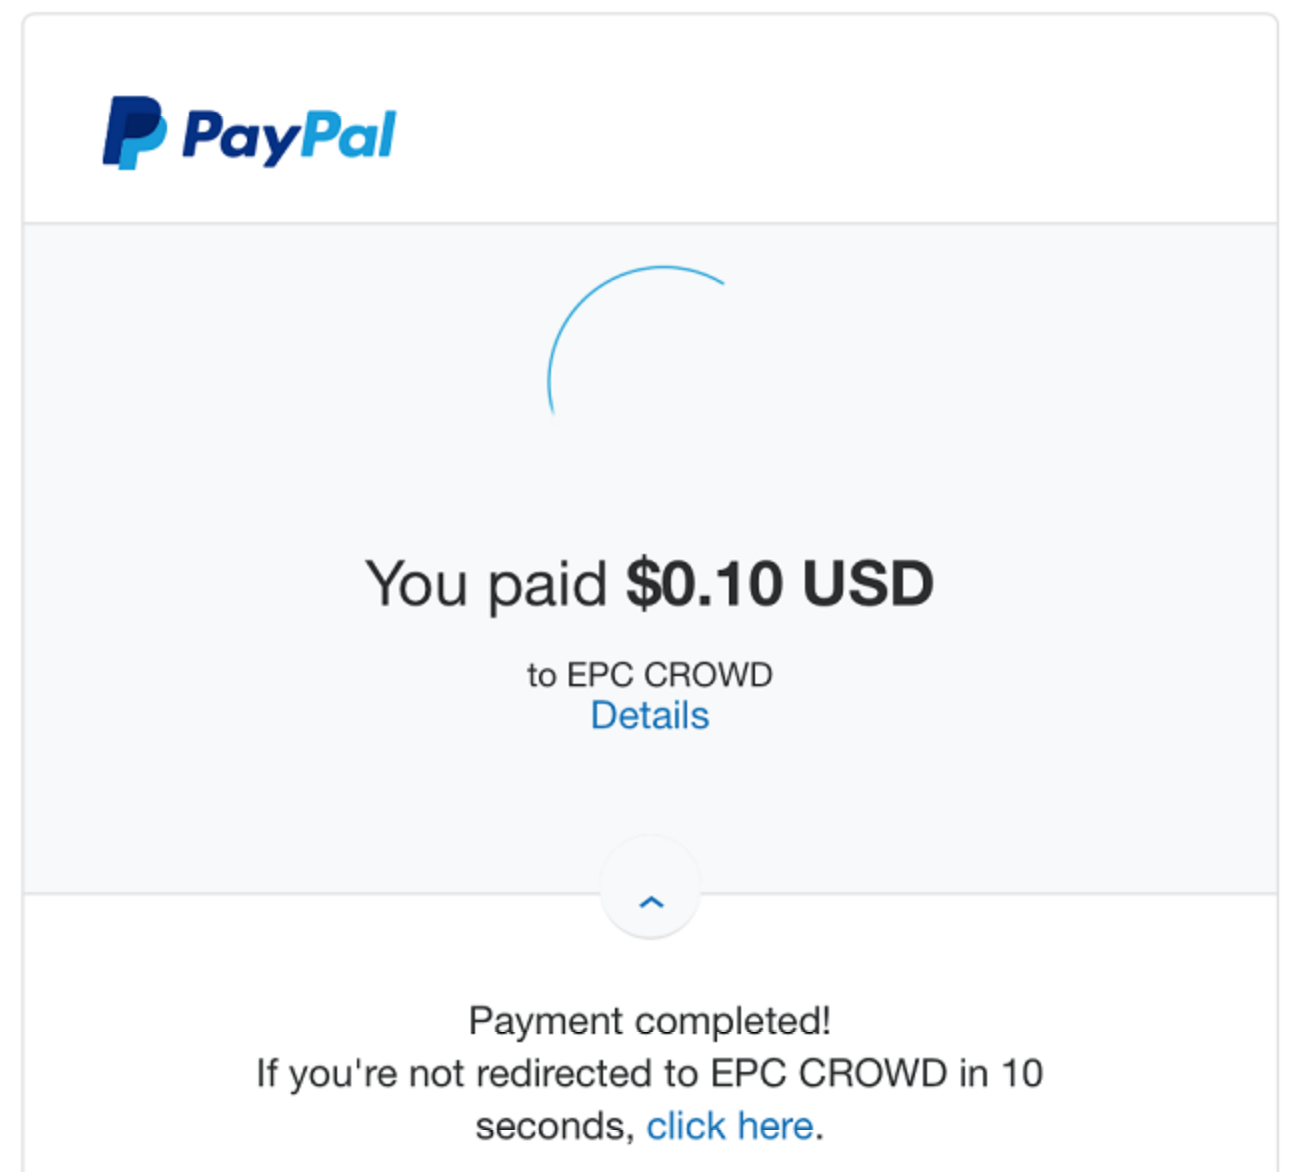 PayPal processing